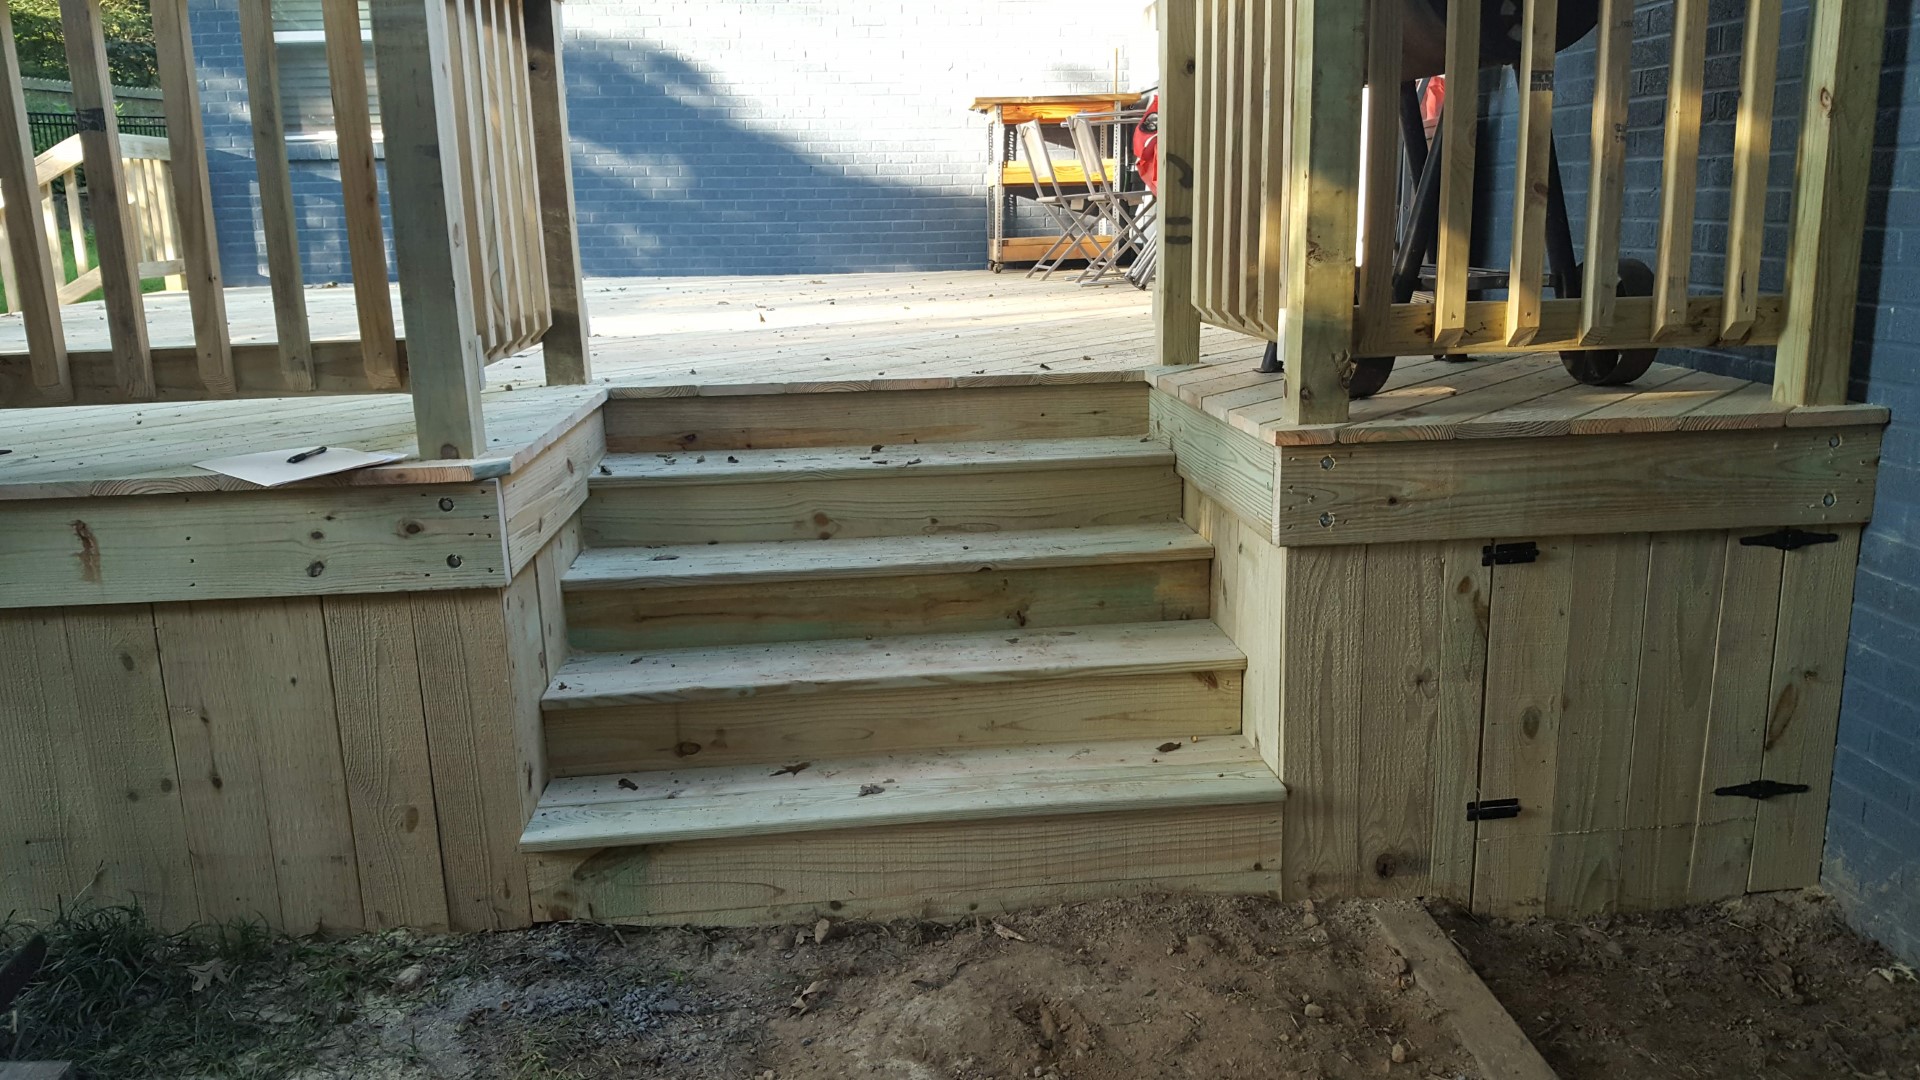 Steps that recess into the deck area